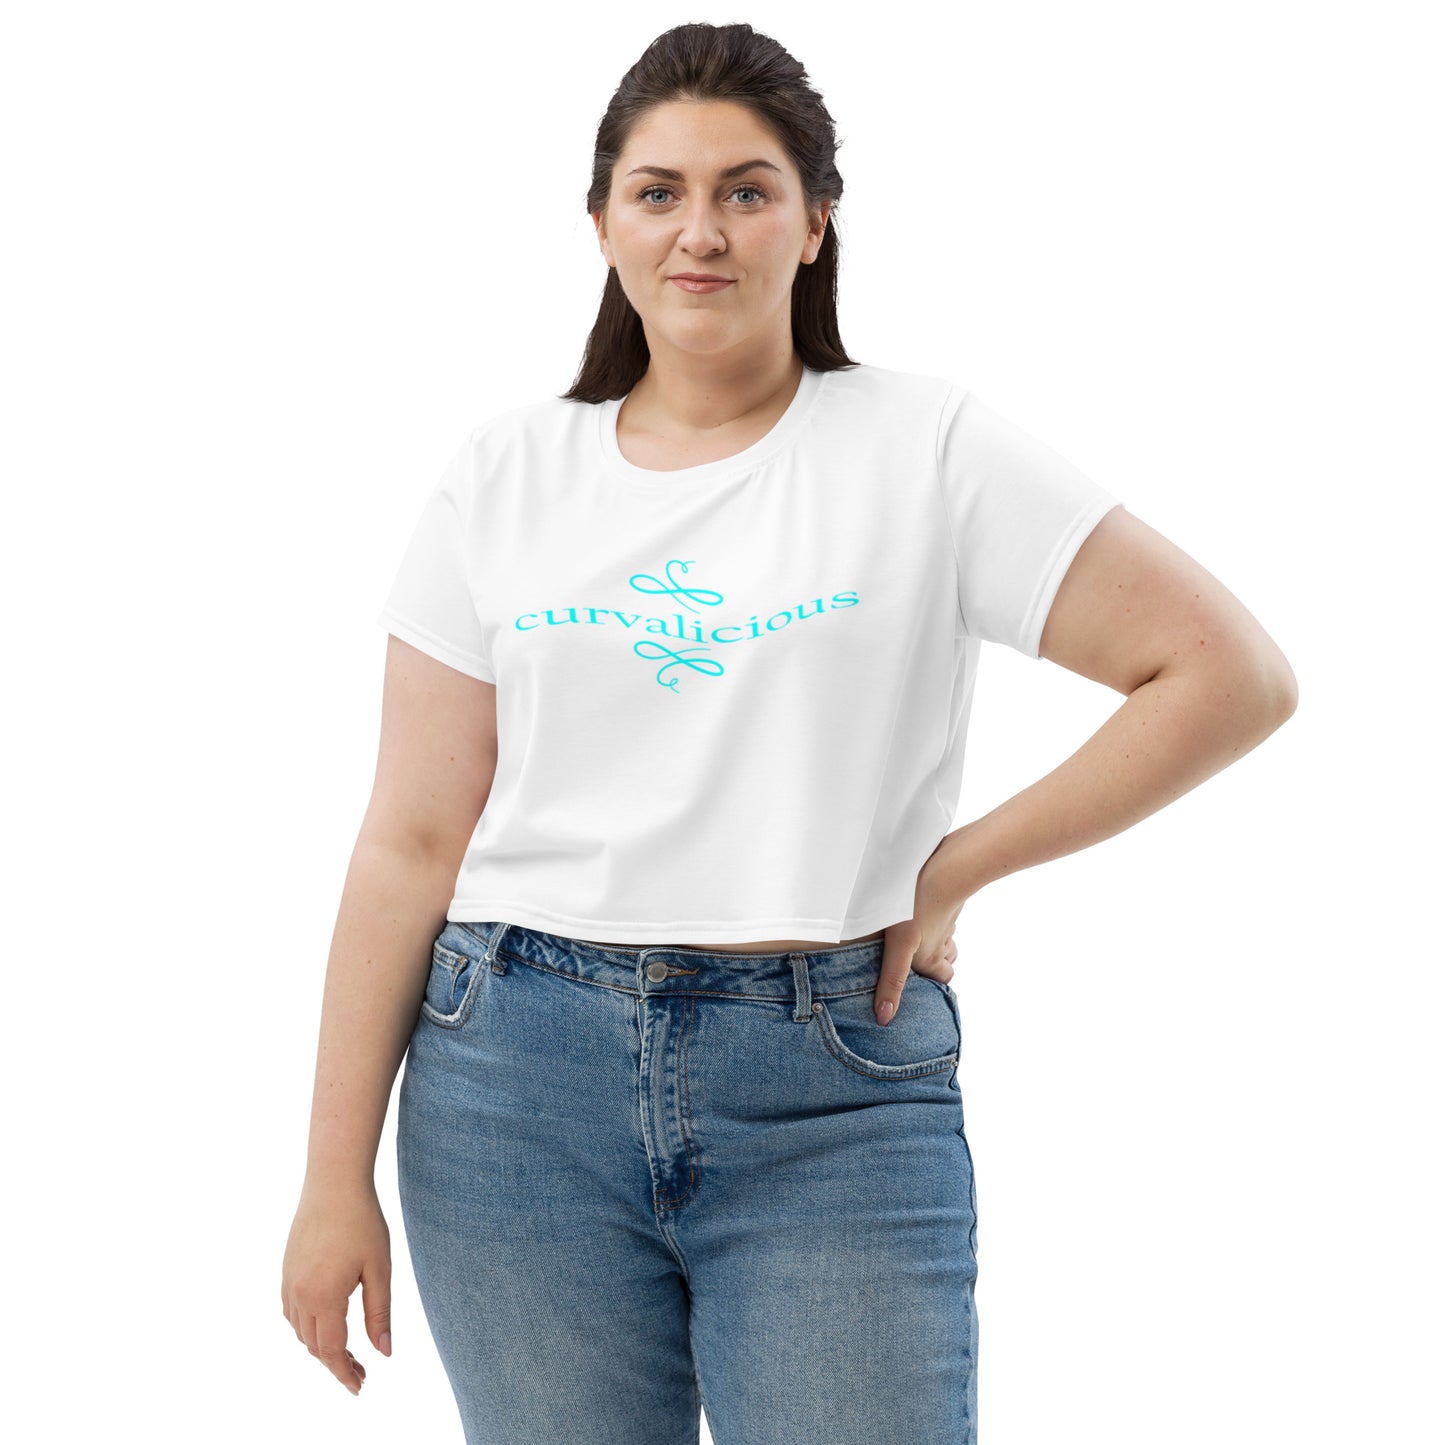 Crop Tee: Curvalicious (turquoise text)